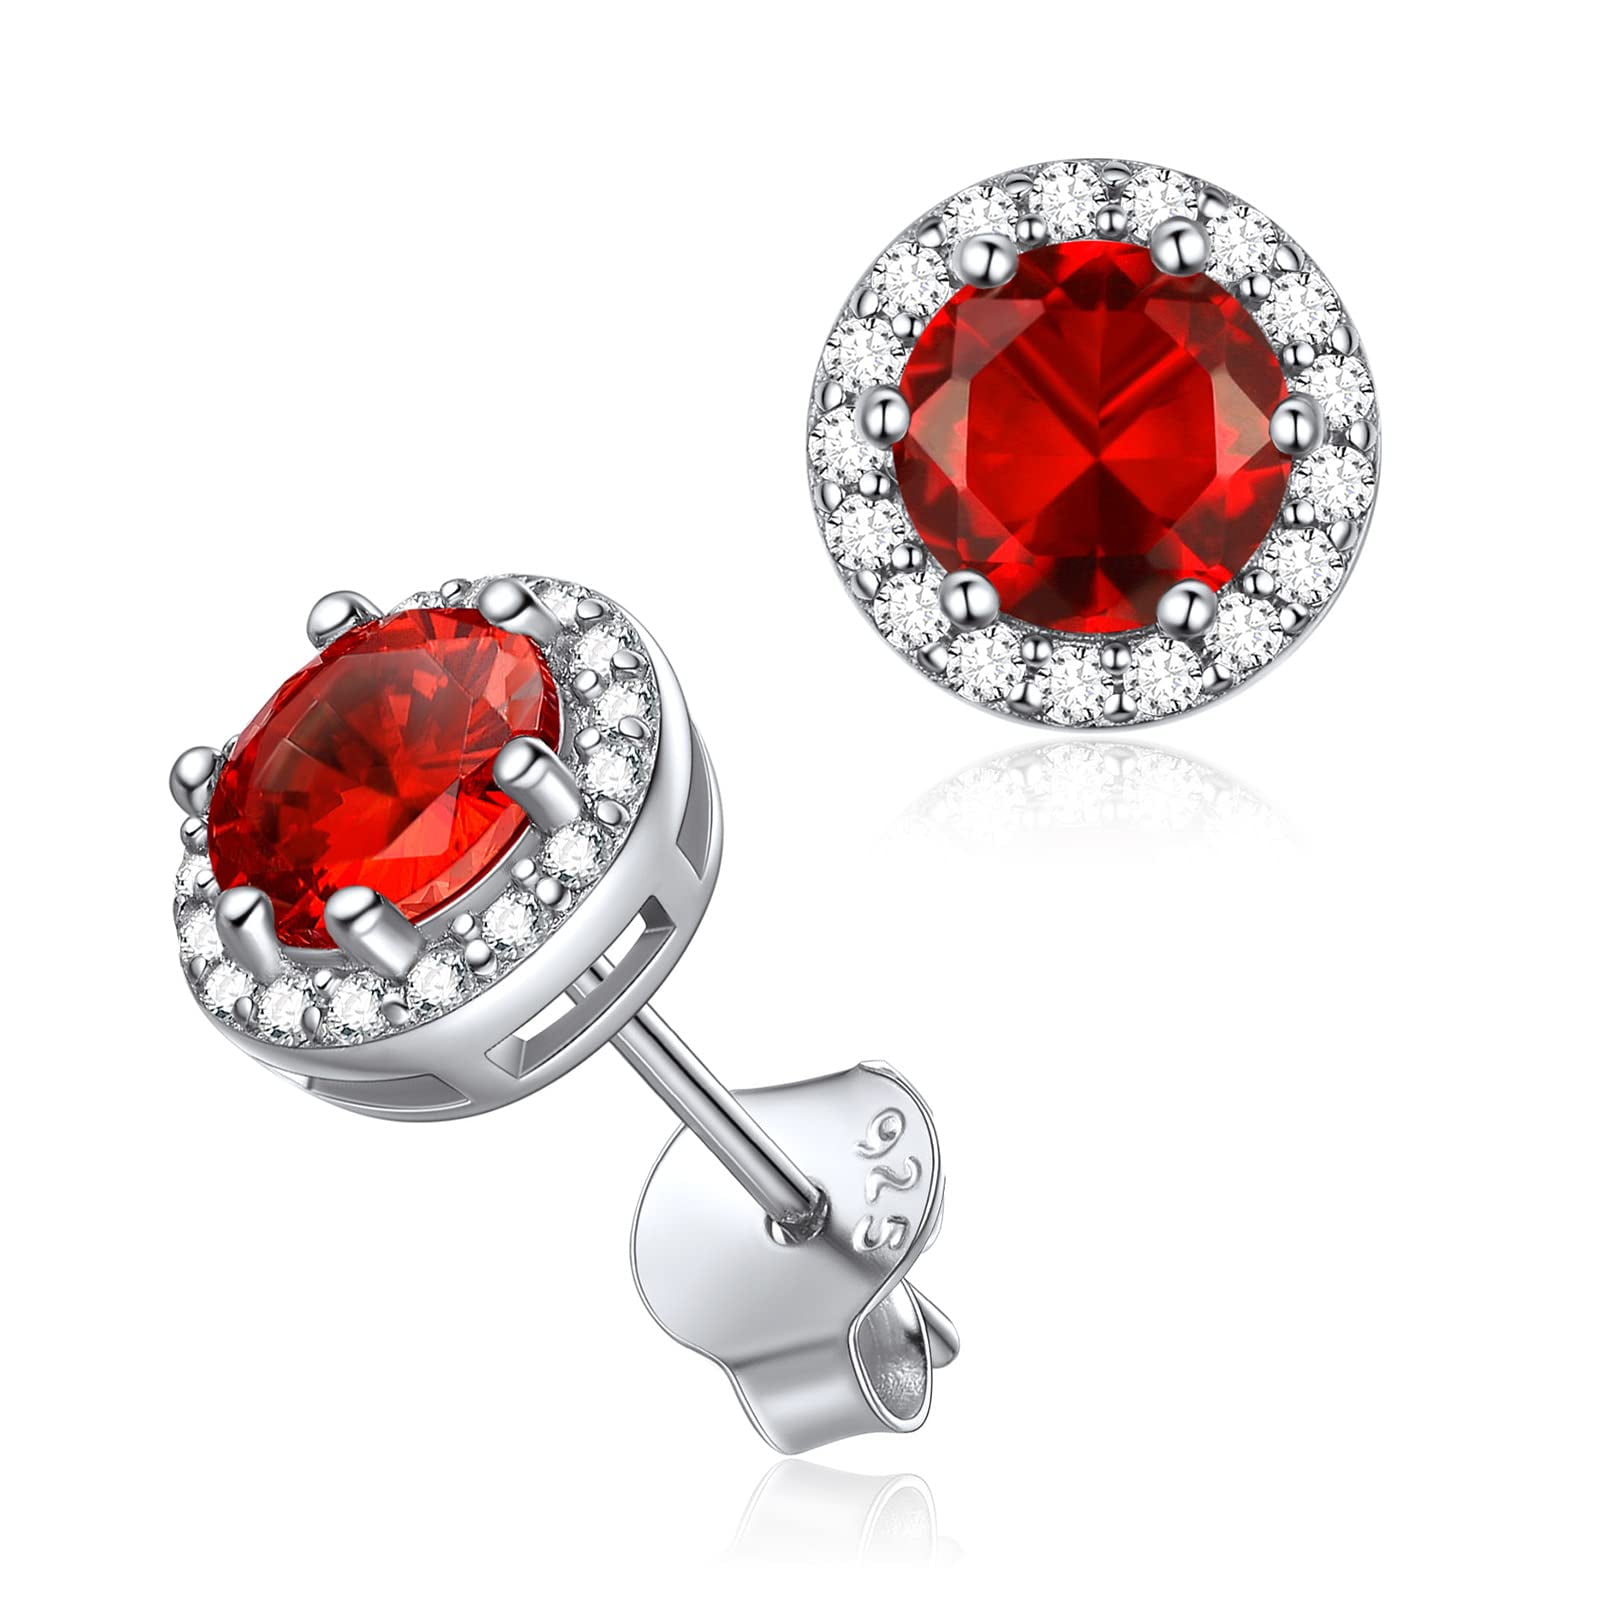 Natural Clear Quartz 925 Sterling Silver Stud Earrings for women Jewelry  Gift Prevent allergy gem jewelry Genuine red stone